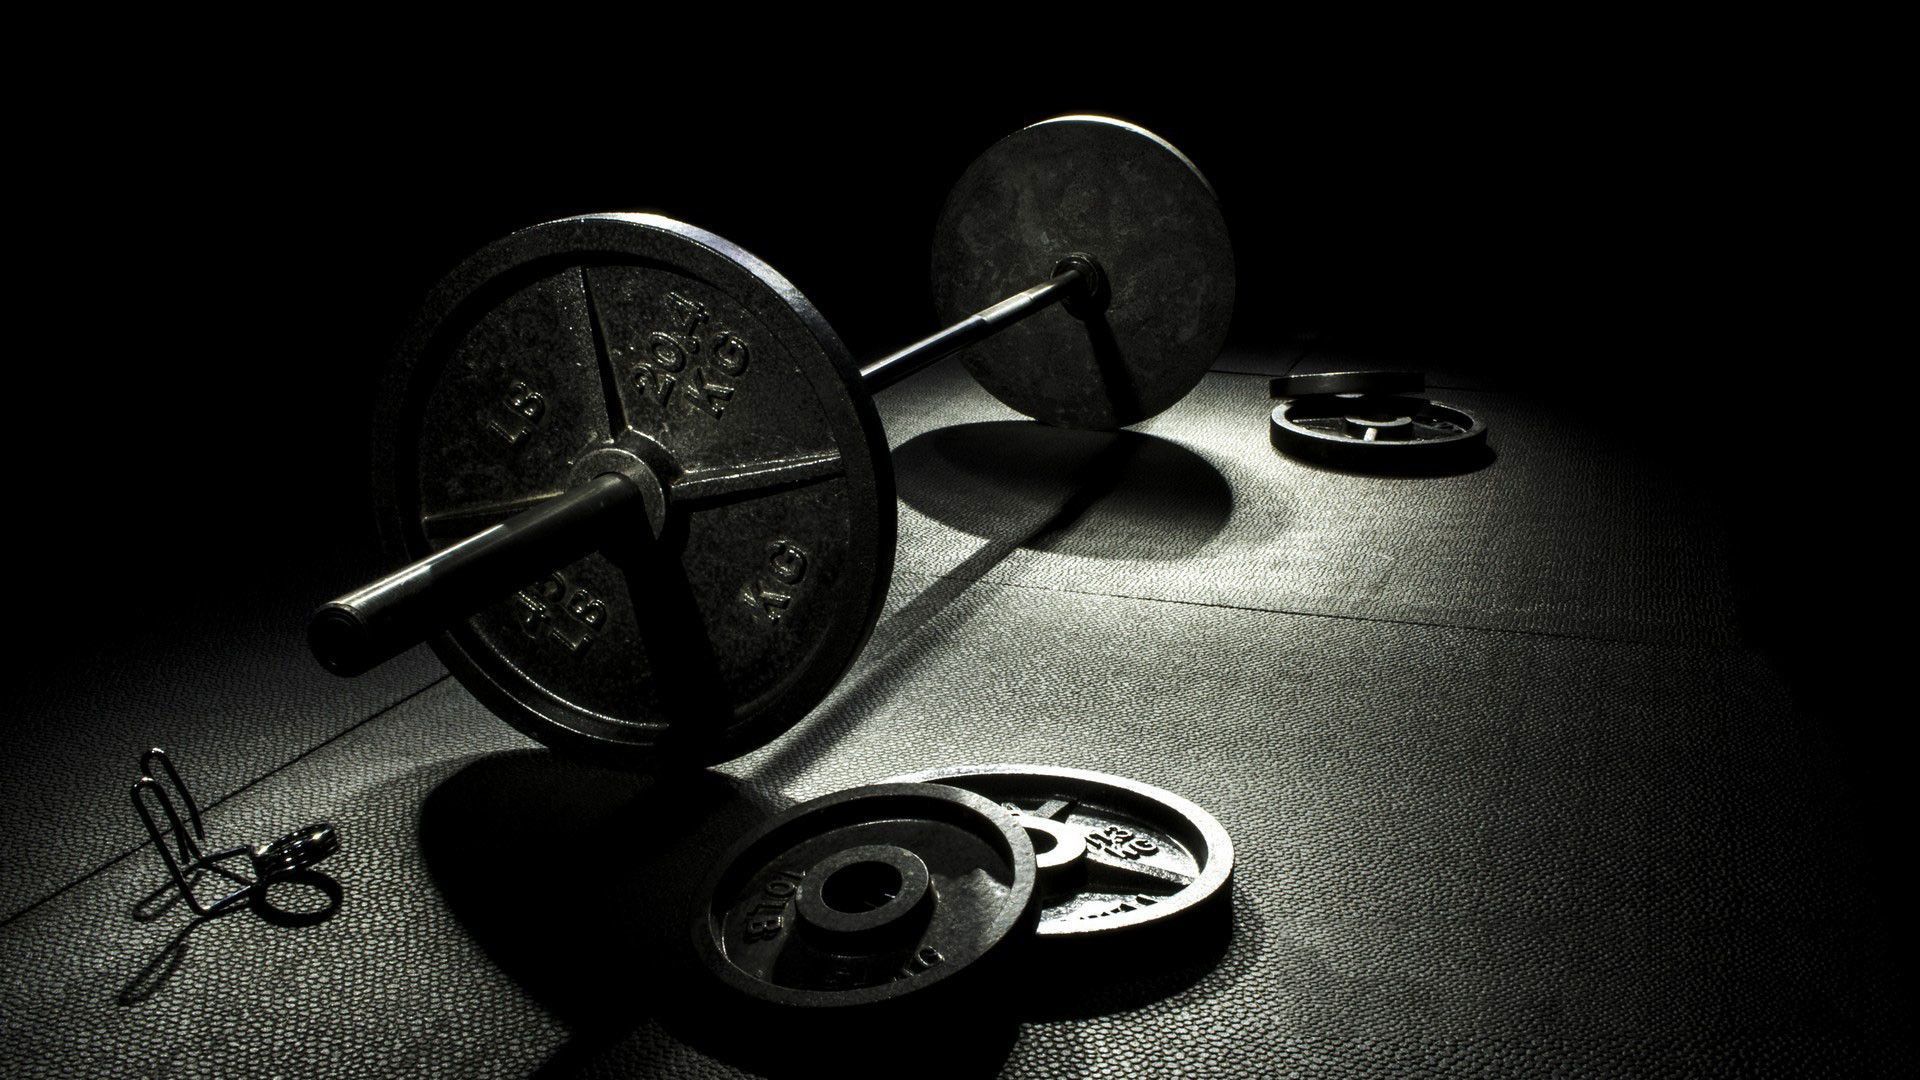 Weightlifting Wallpaper Free. Workout music, Olympic weights, Gym wallpaper